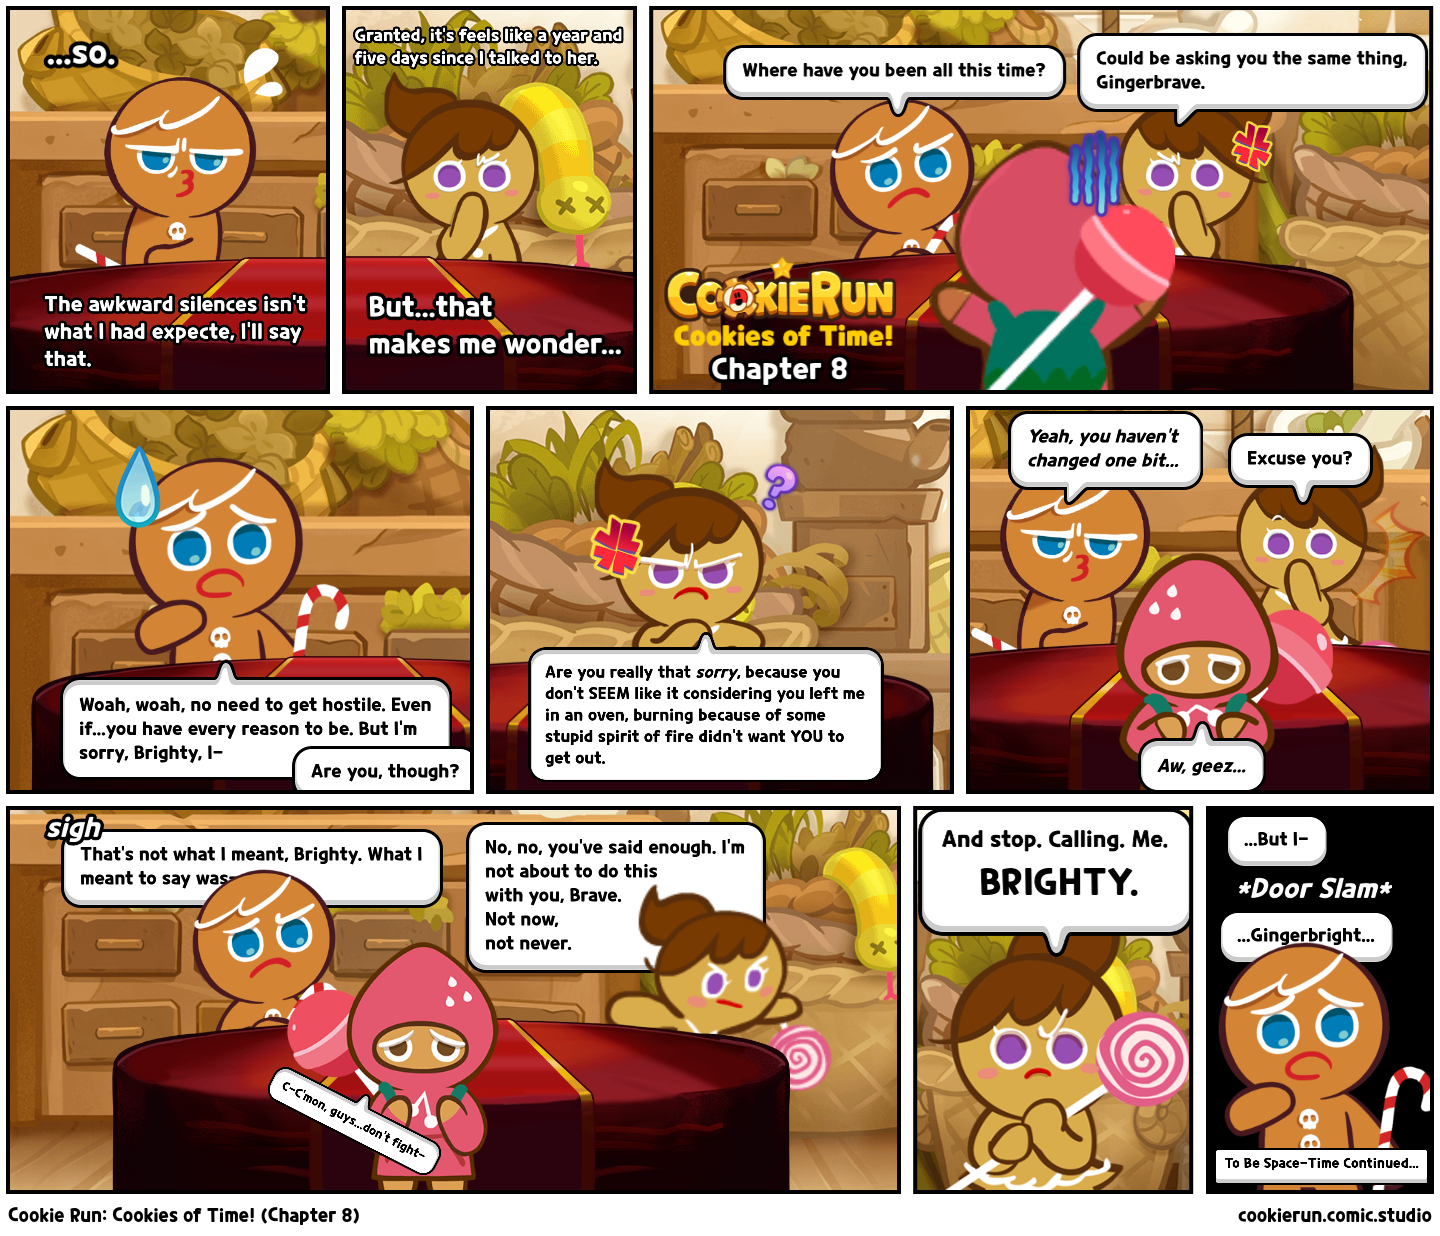 Cookie Run: Cookies of Time! (Chapter 8)